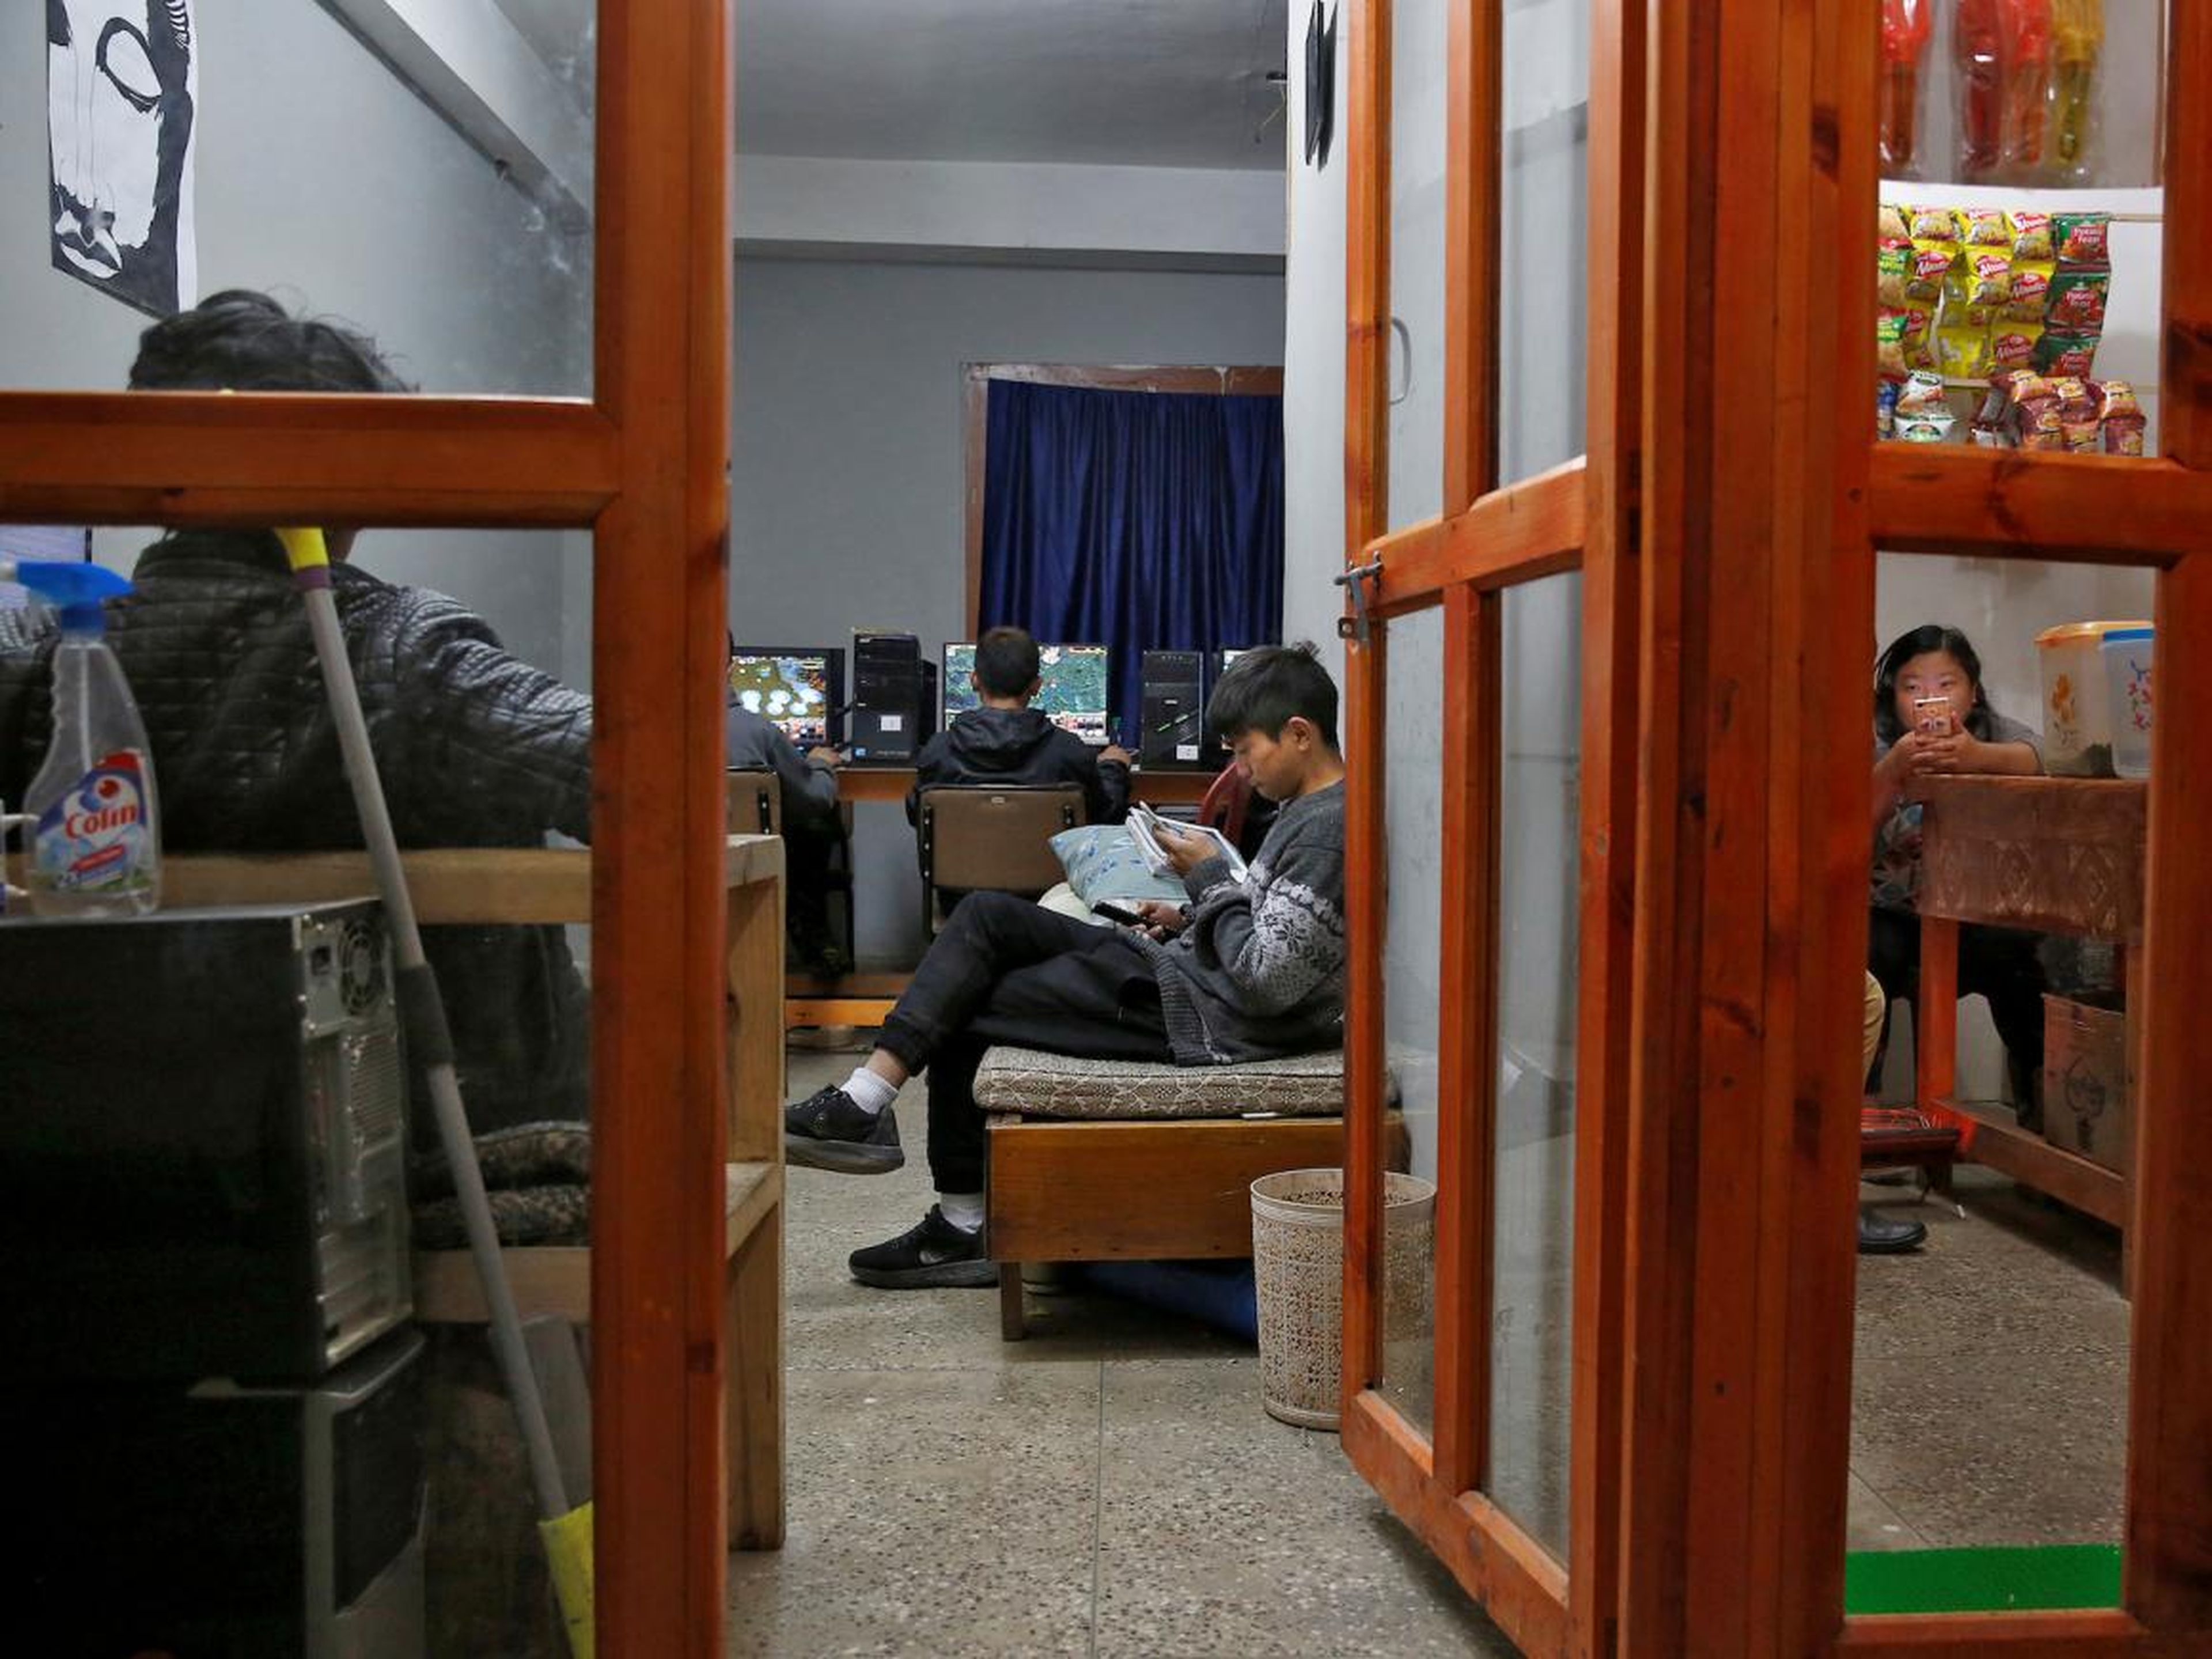 Internet cafes are filled with teenagers and young adults looking for something to do.